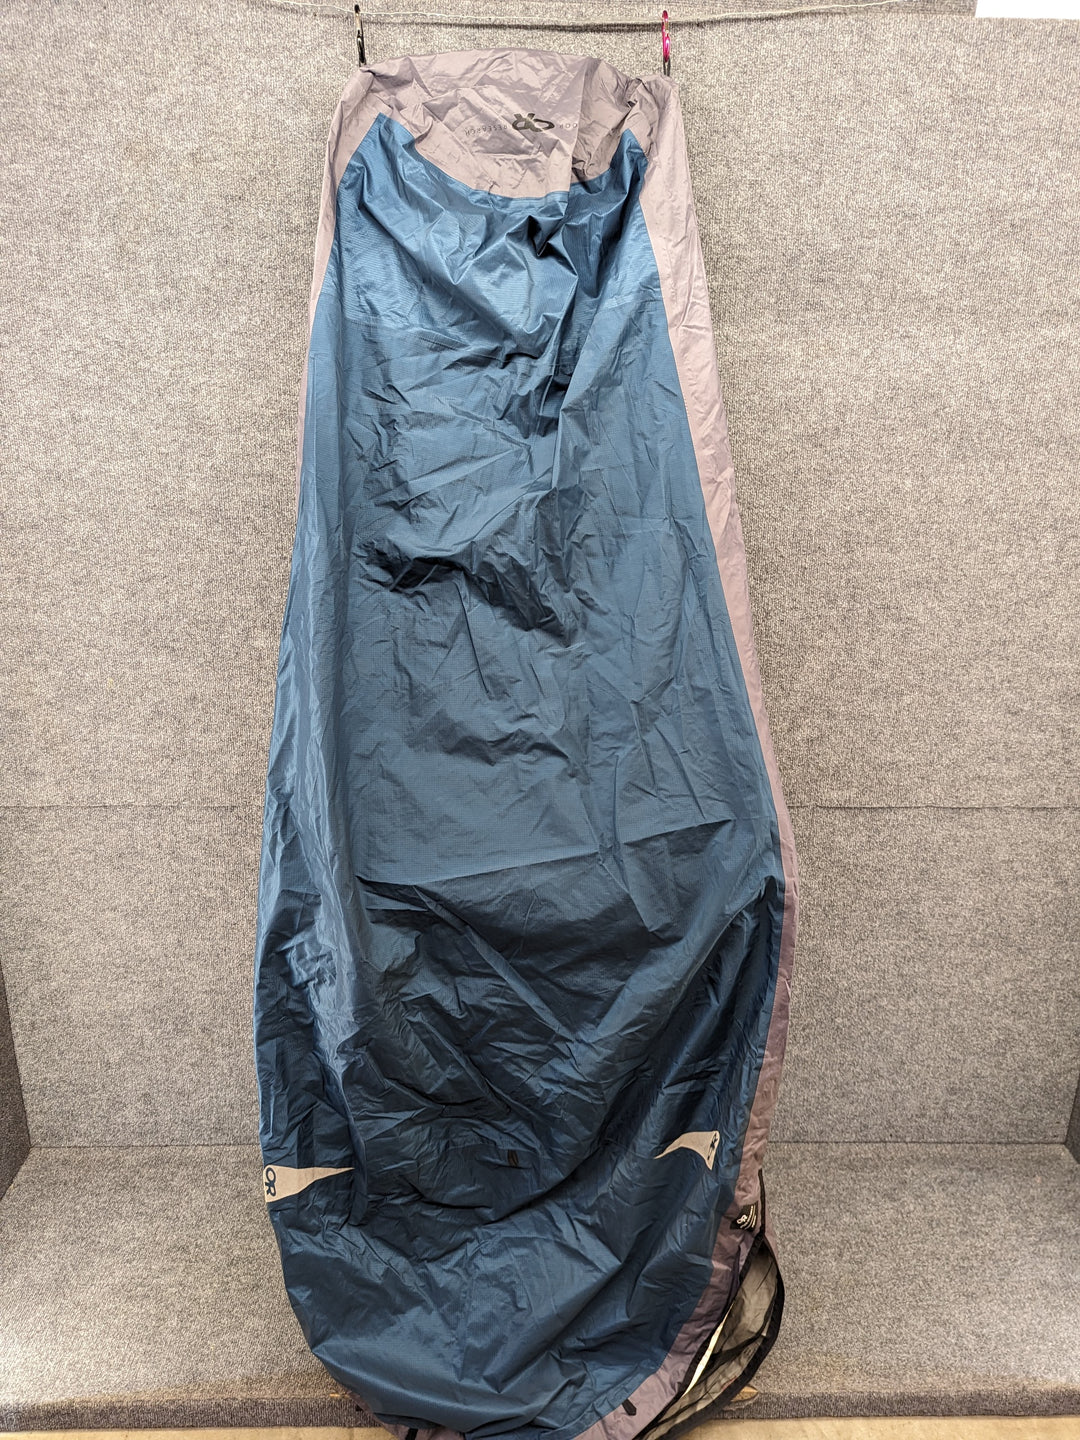 Outdoor Research Tent Size 1 Person Bivy Sack